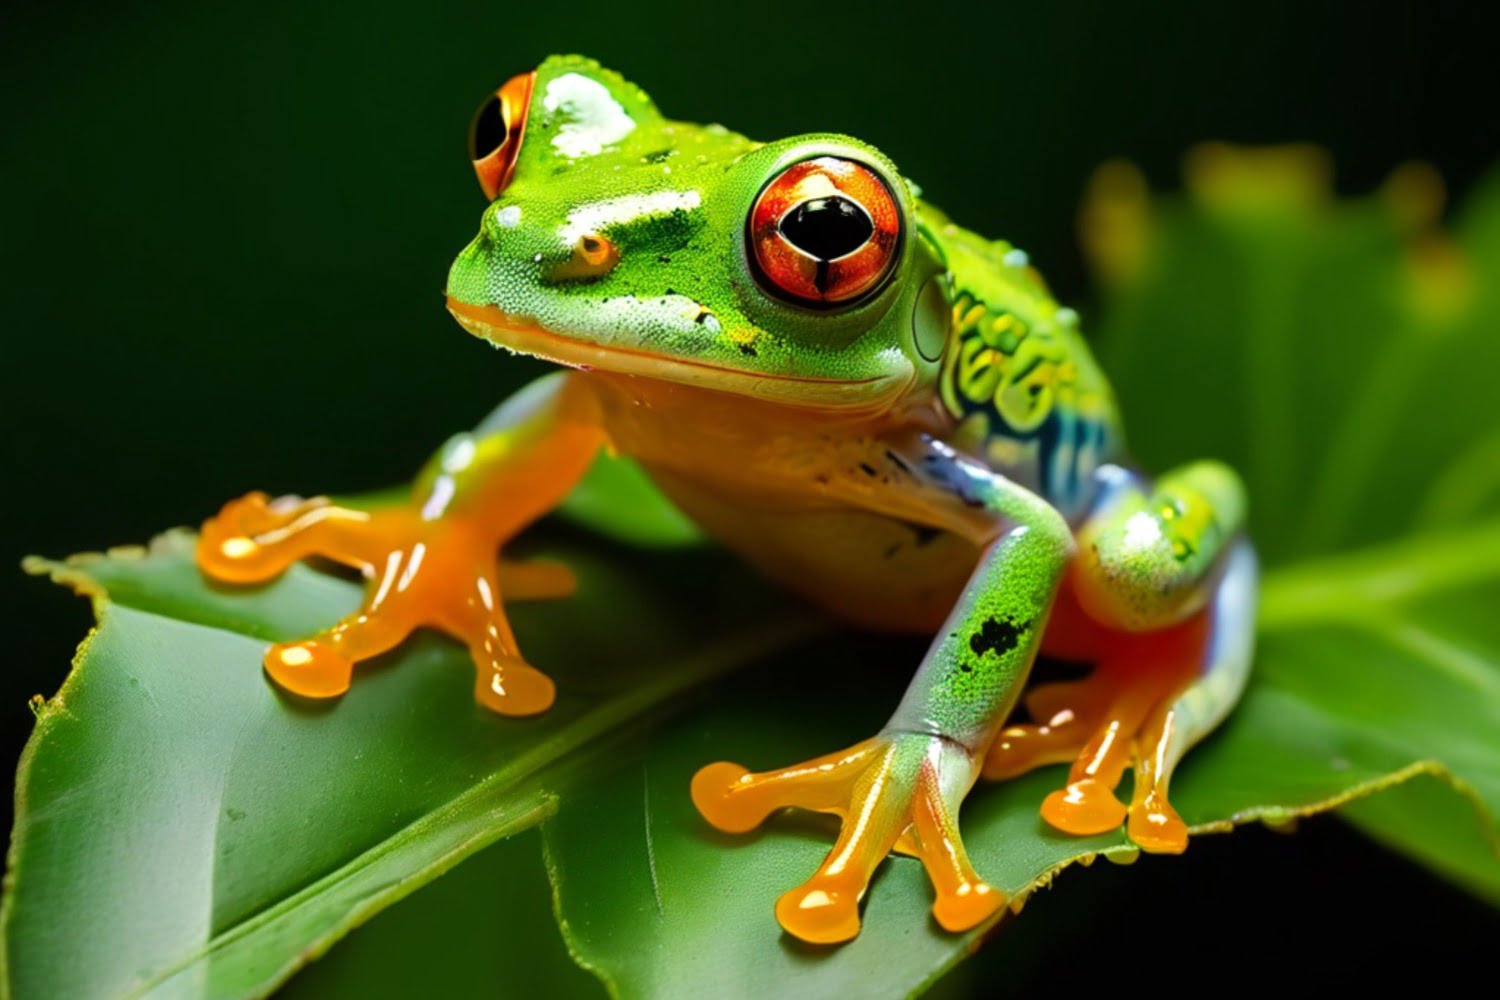 Kermit the Frog Inspires Name of New Ancient Amphibian Species